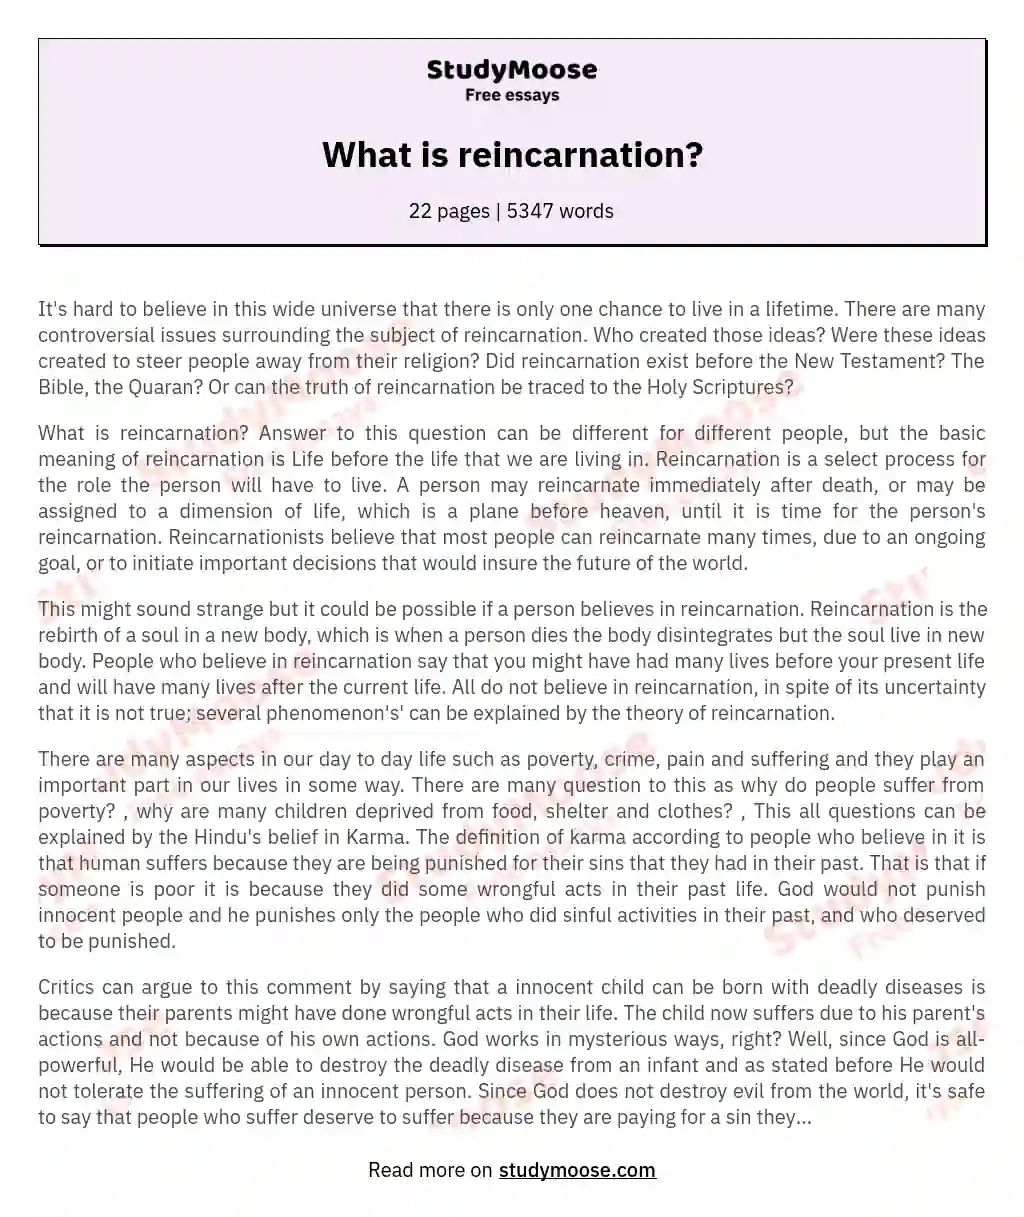 What is reincarnation?